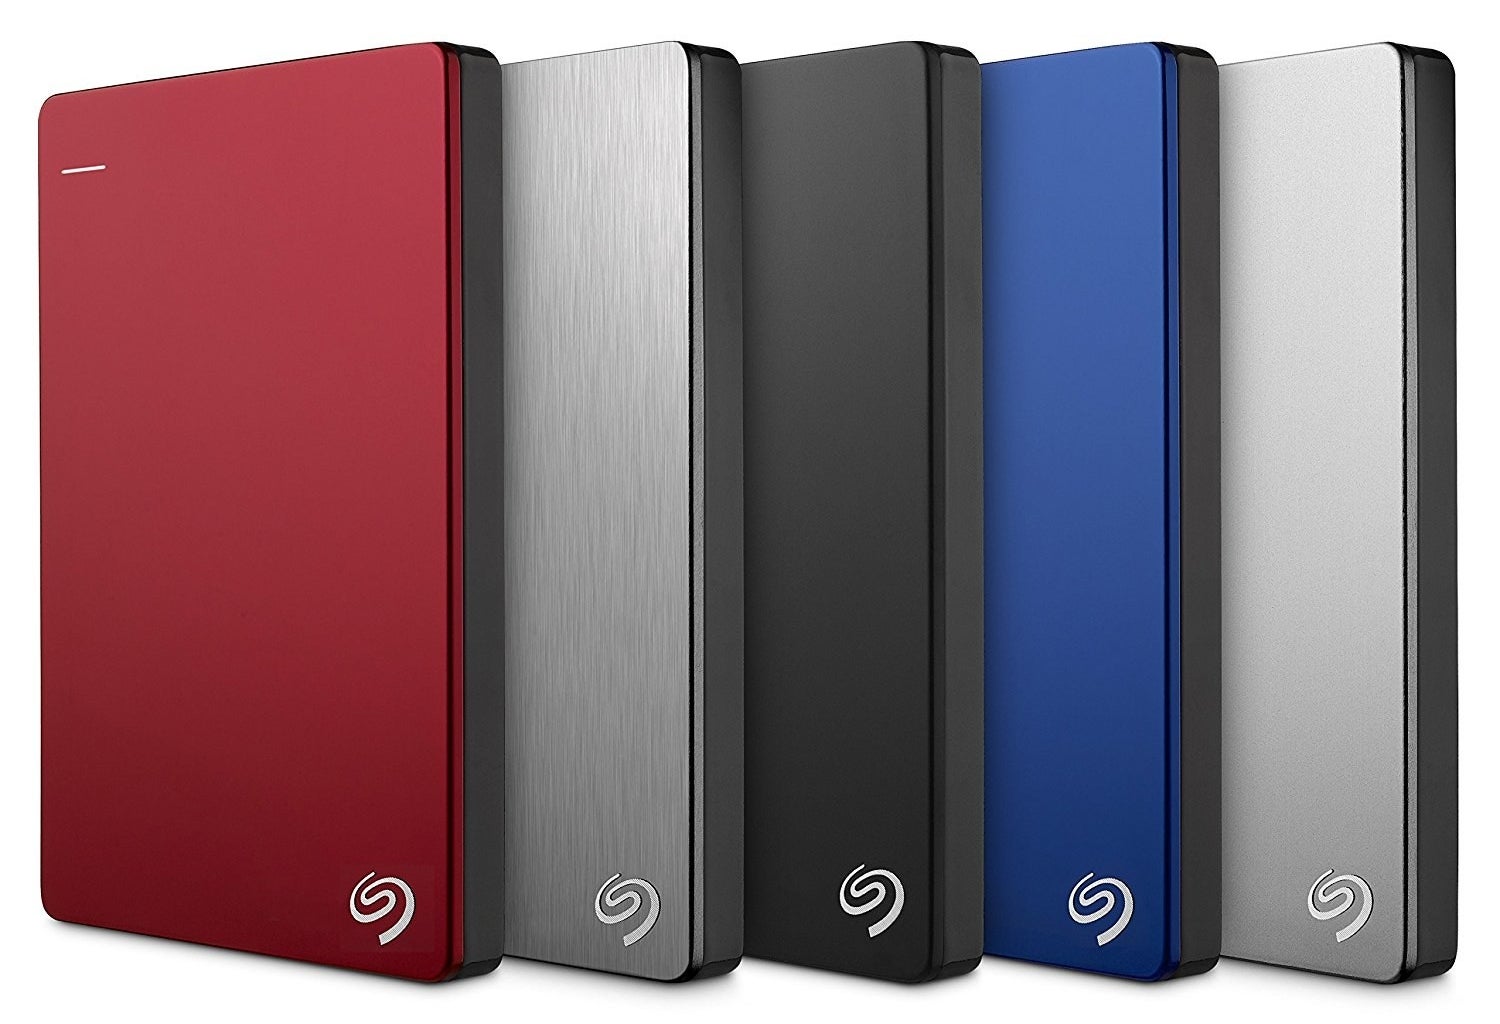 five portable hard drives in red, gray, black, blue, and silver